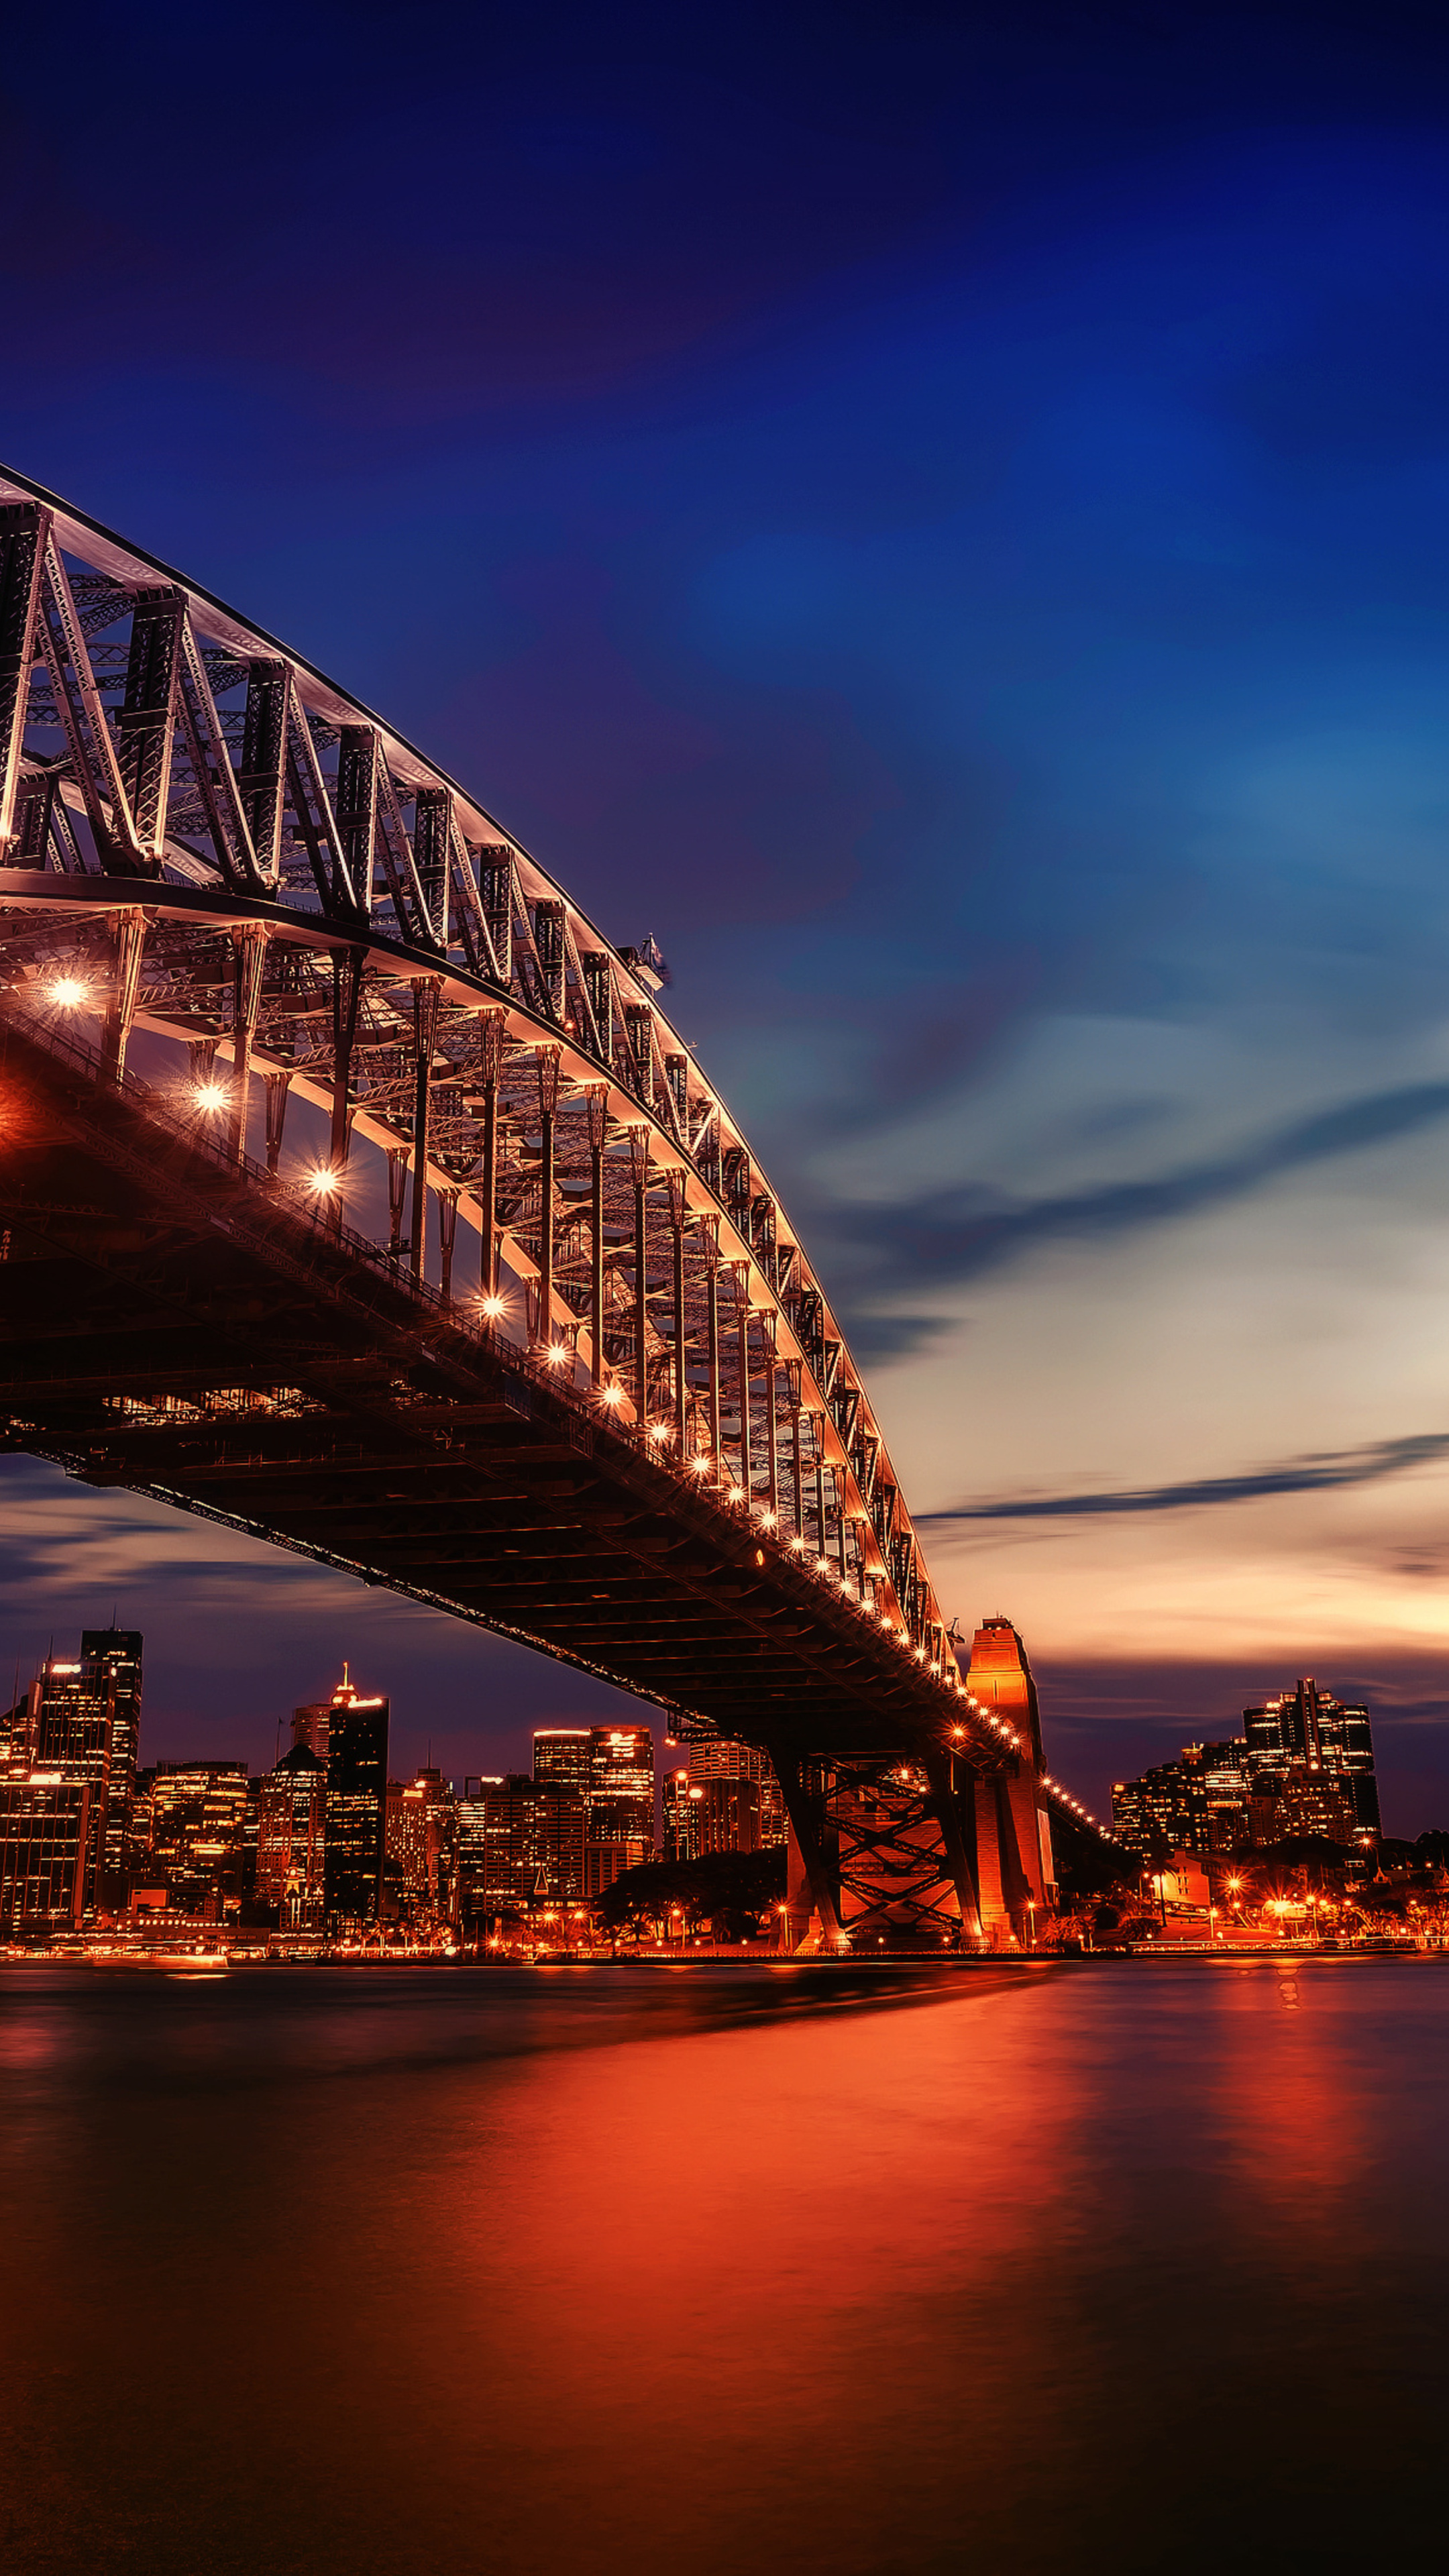 Sydney: Harbour Bridge, Ranked eleventh in the world for economic opportunity. 2160x3840 4K Background.